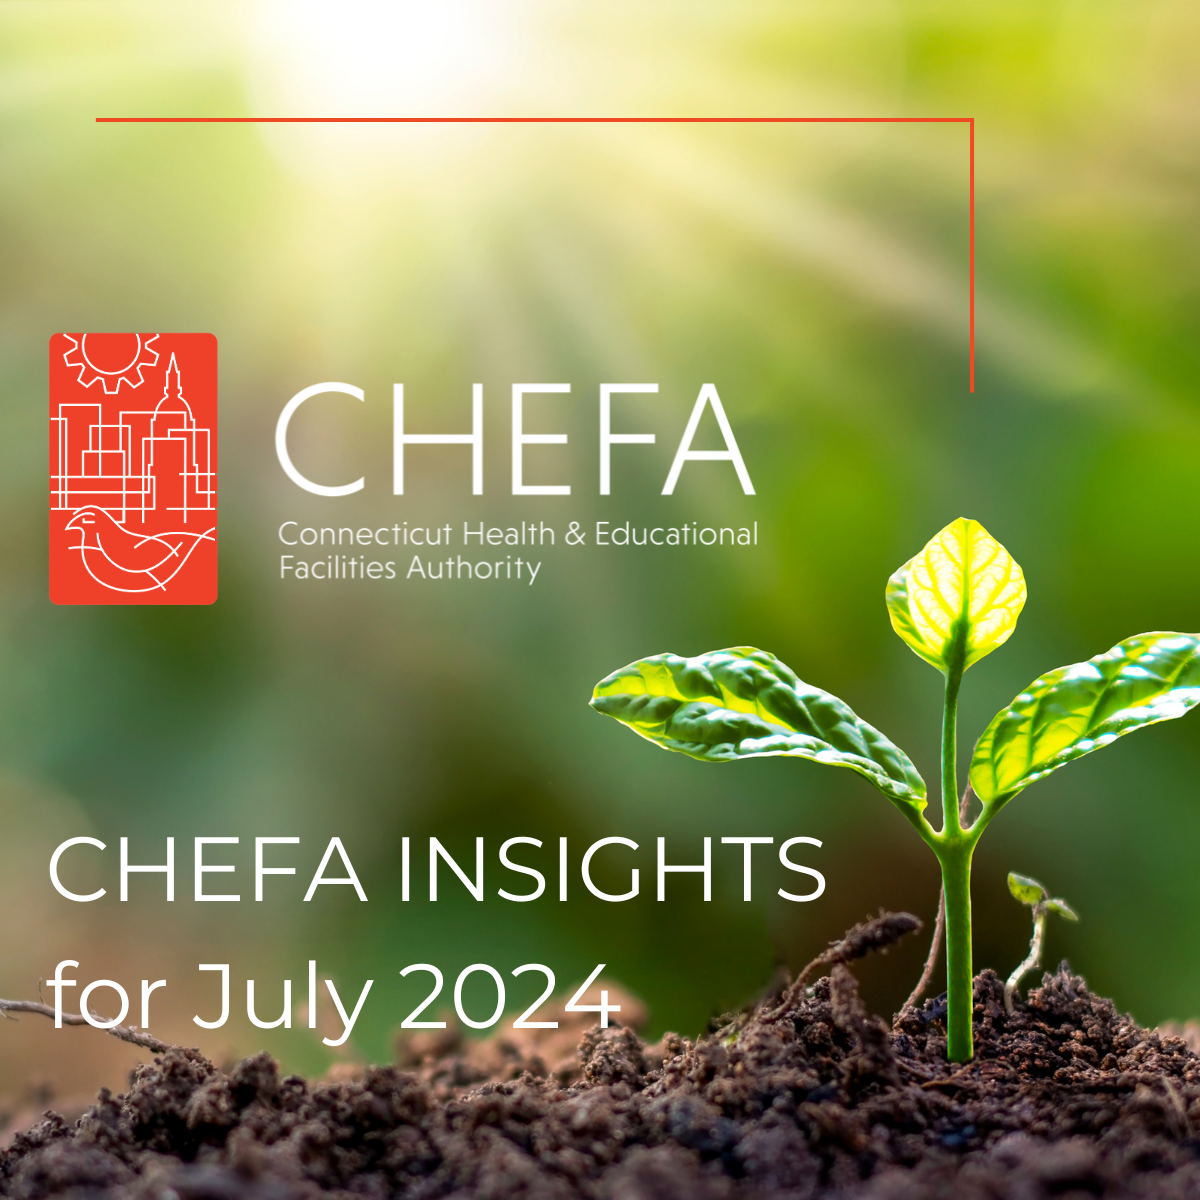 Small plant growing out of the ground with sunlight streaming from the background. CHEFA logo is overlaying the image, along with CHEFA Insights for July 2024